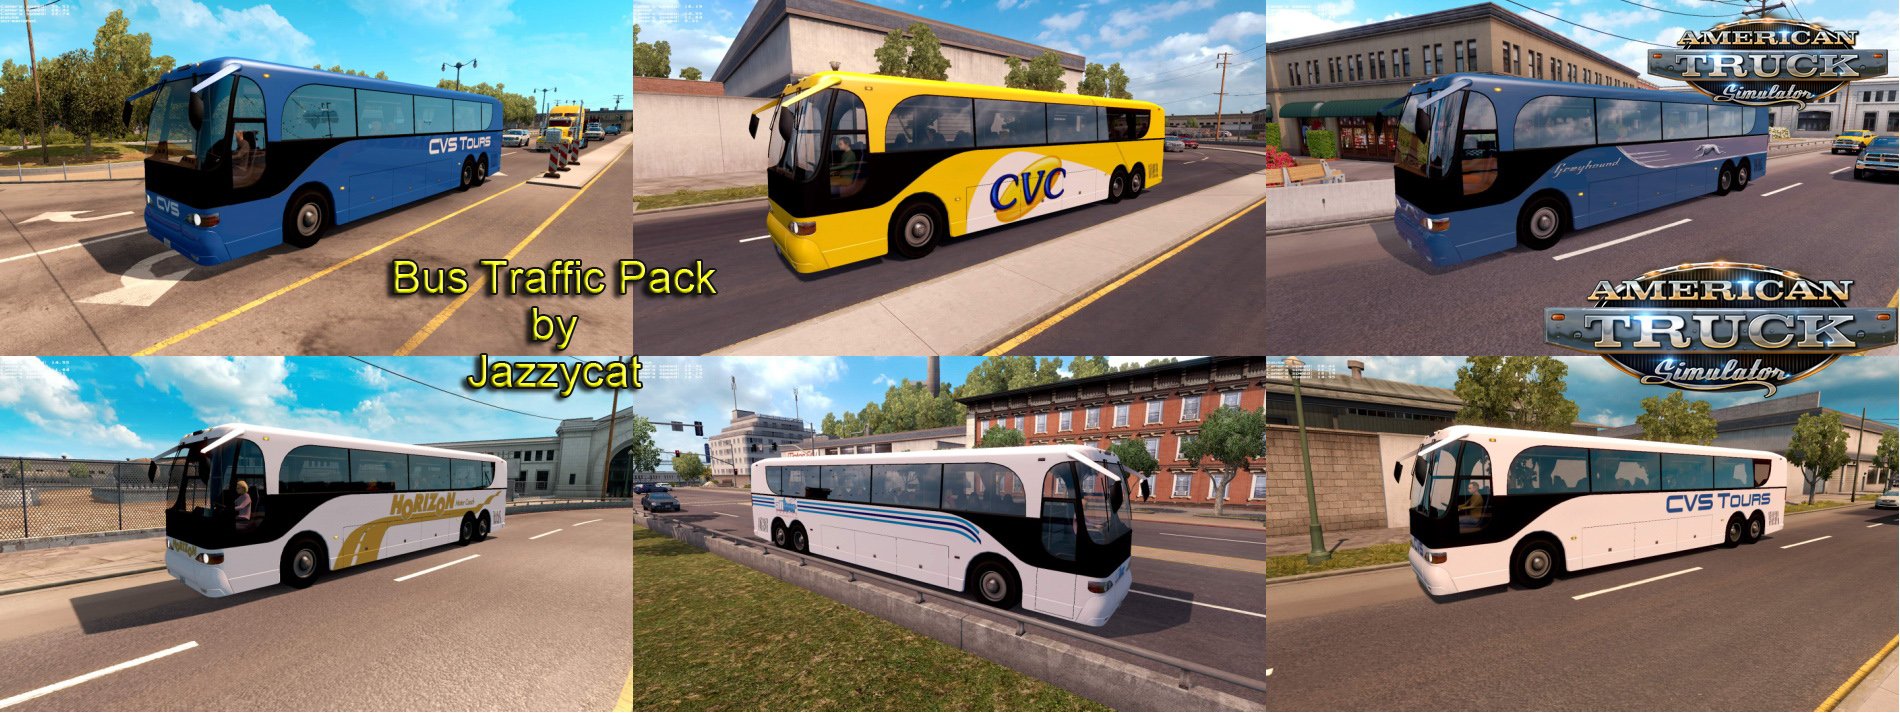 Bus Traffic Pack v1.2 by Jazzycat